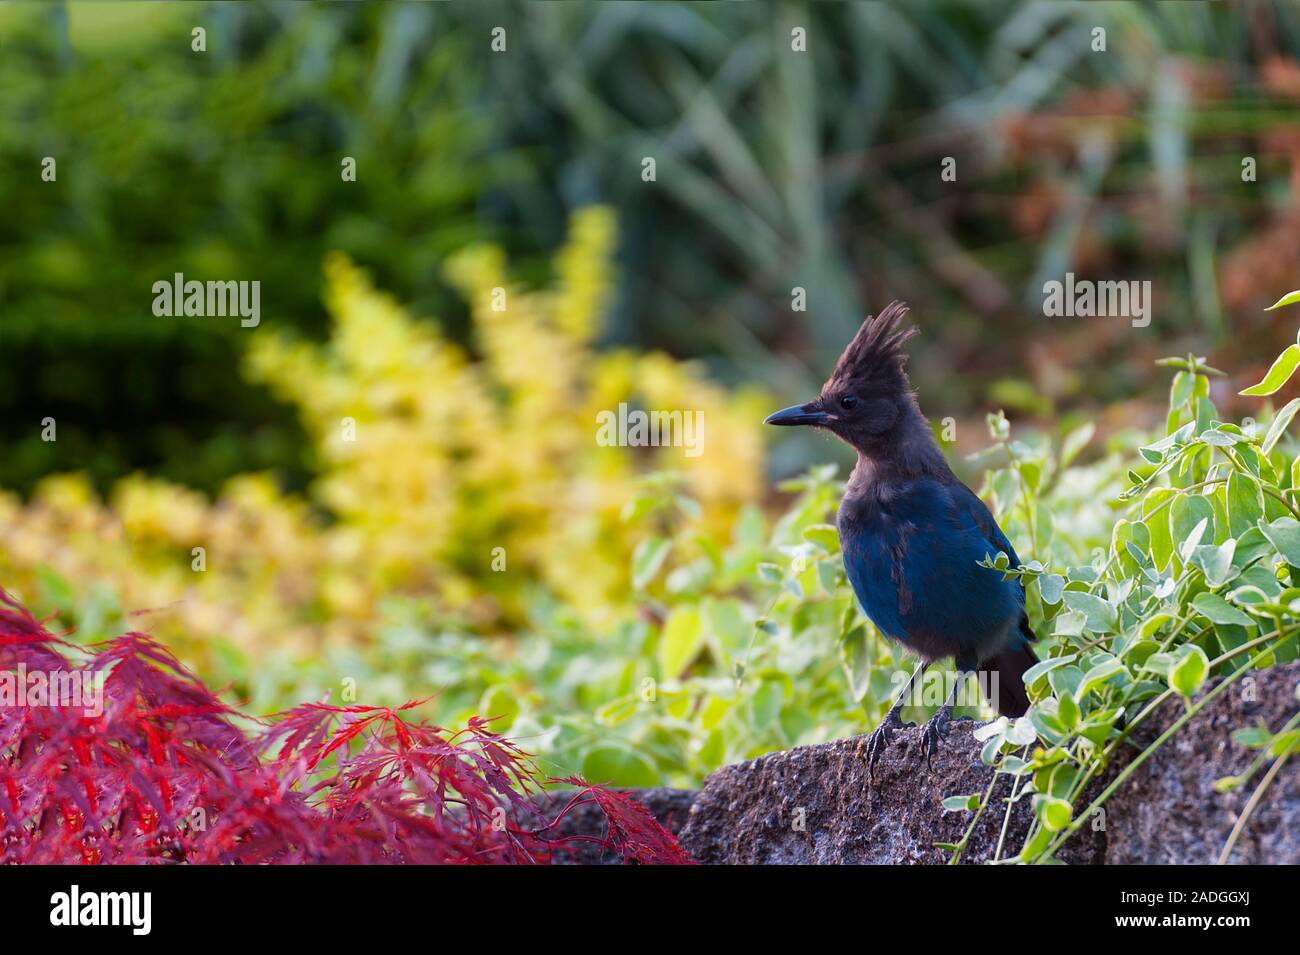 A bluejay stands on top of a brick wall in a backyard garden Stock Photo